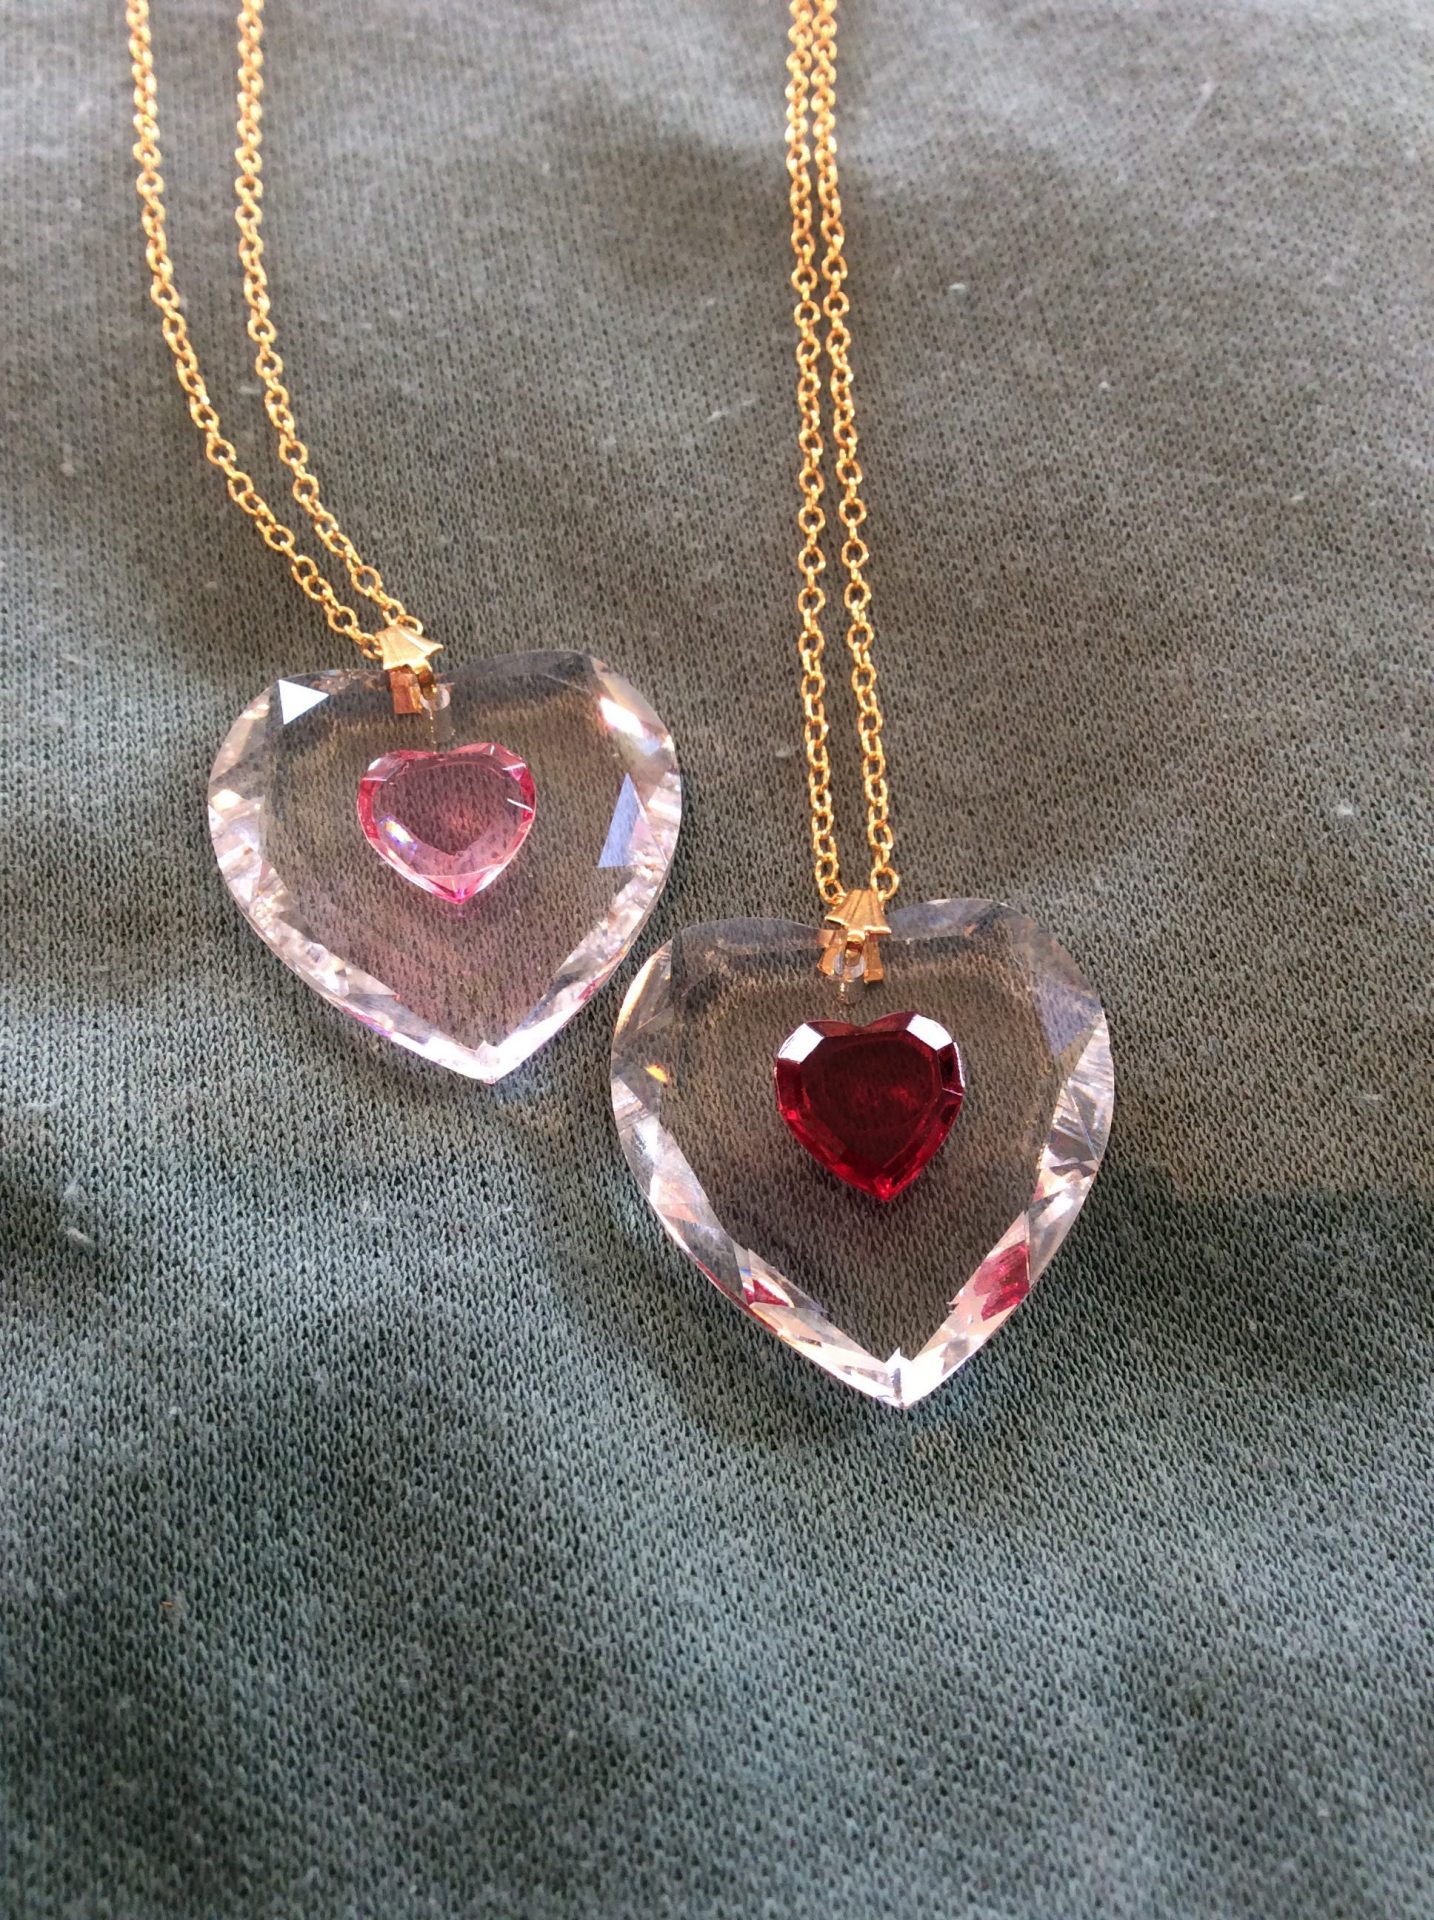 Vintage Crystal Heart Pendant on Gold fill Chain - 1 piece - BeadHoliday